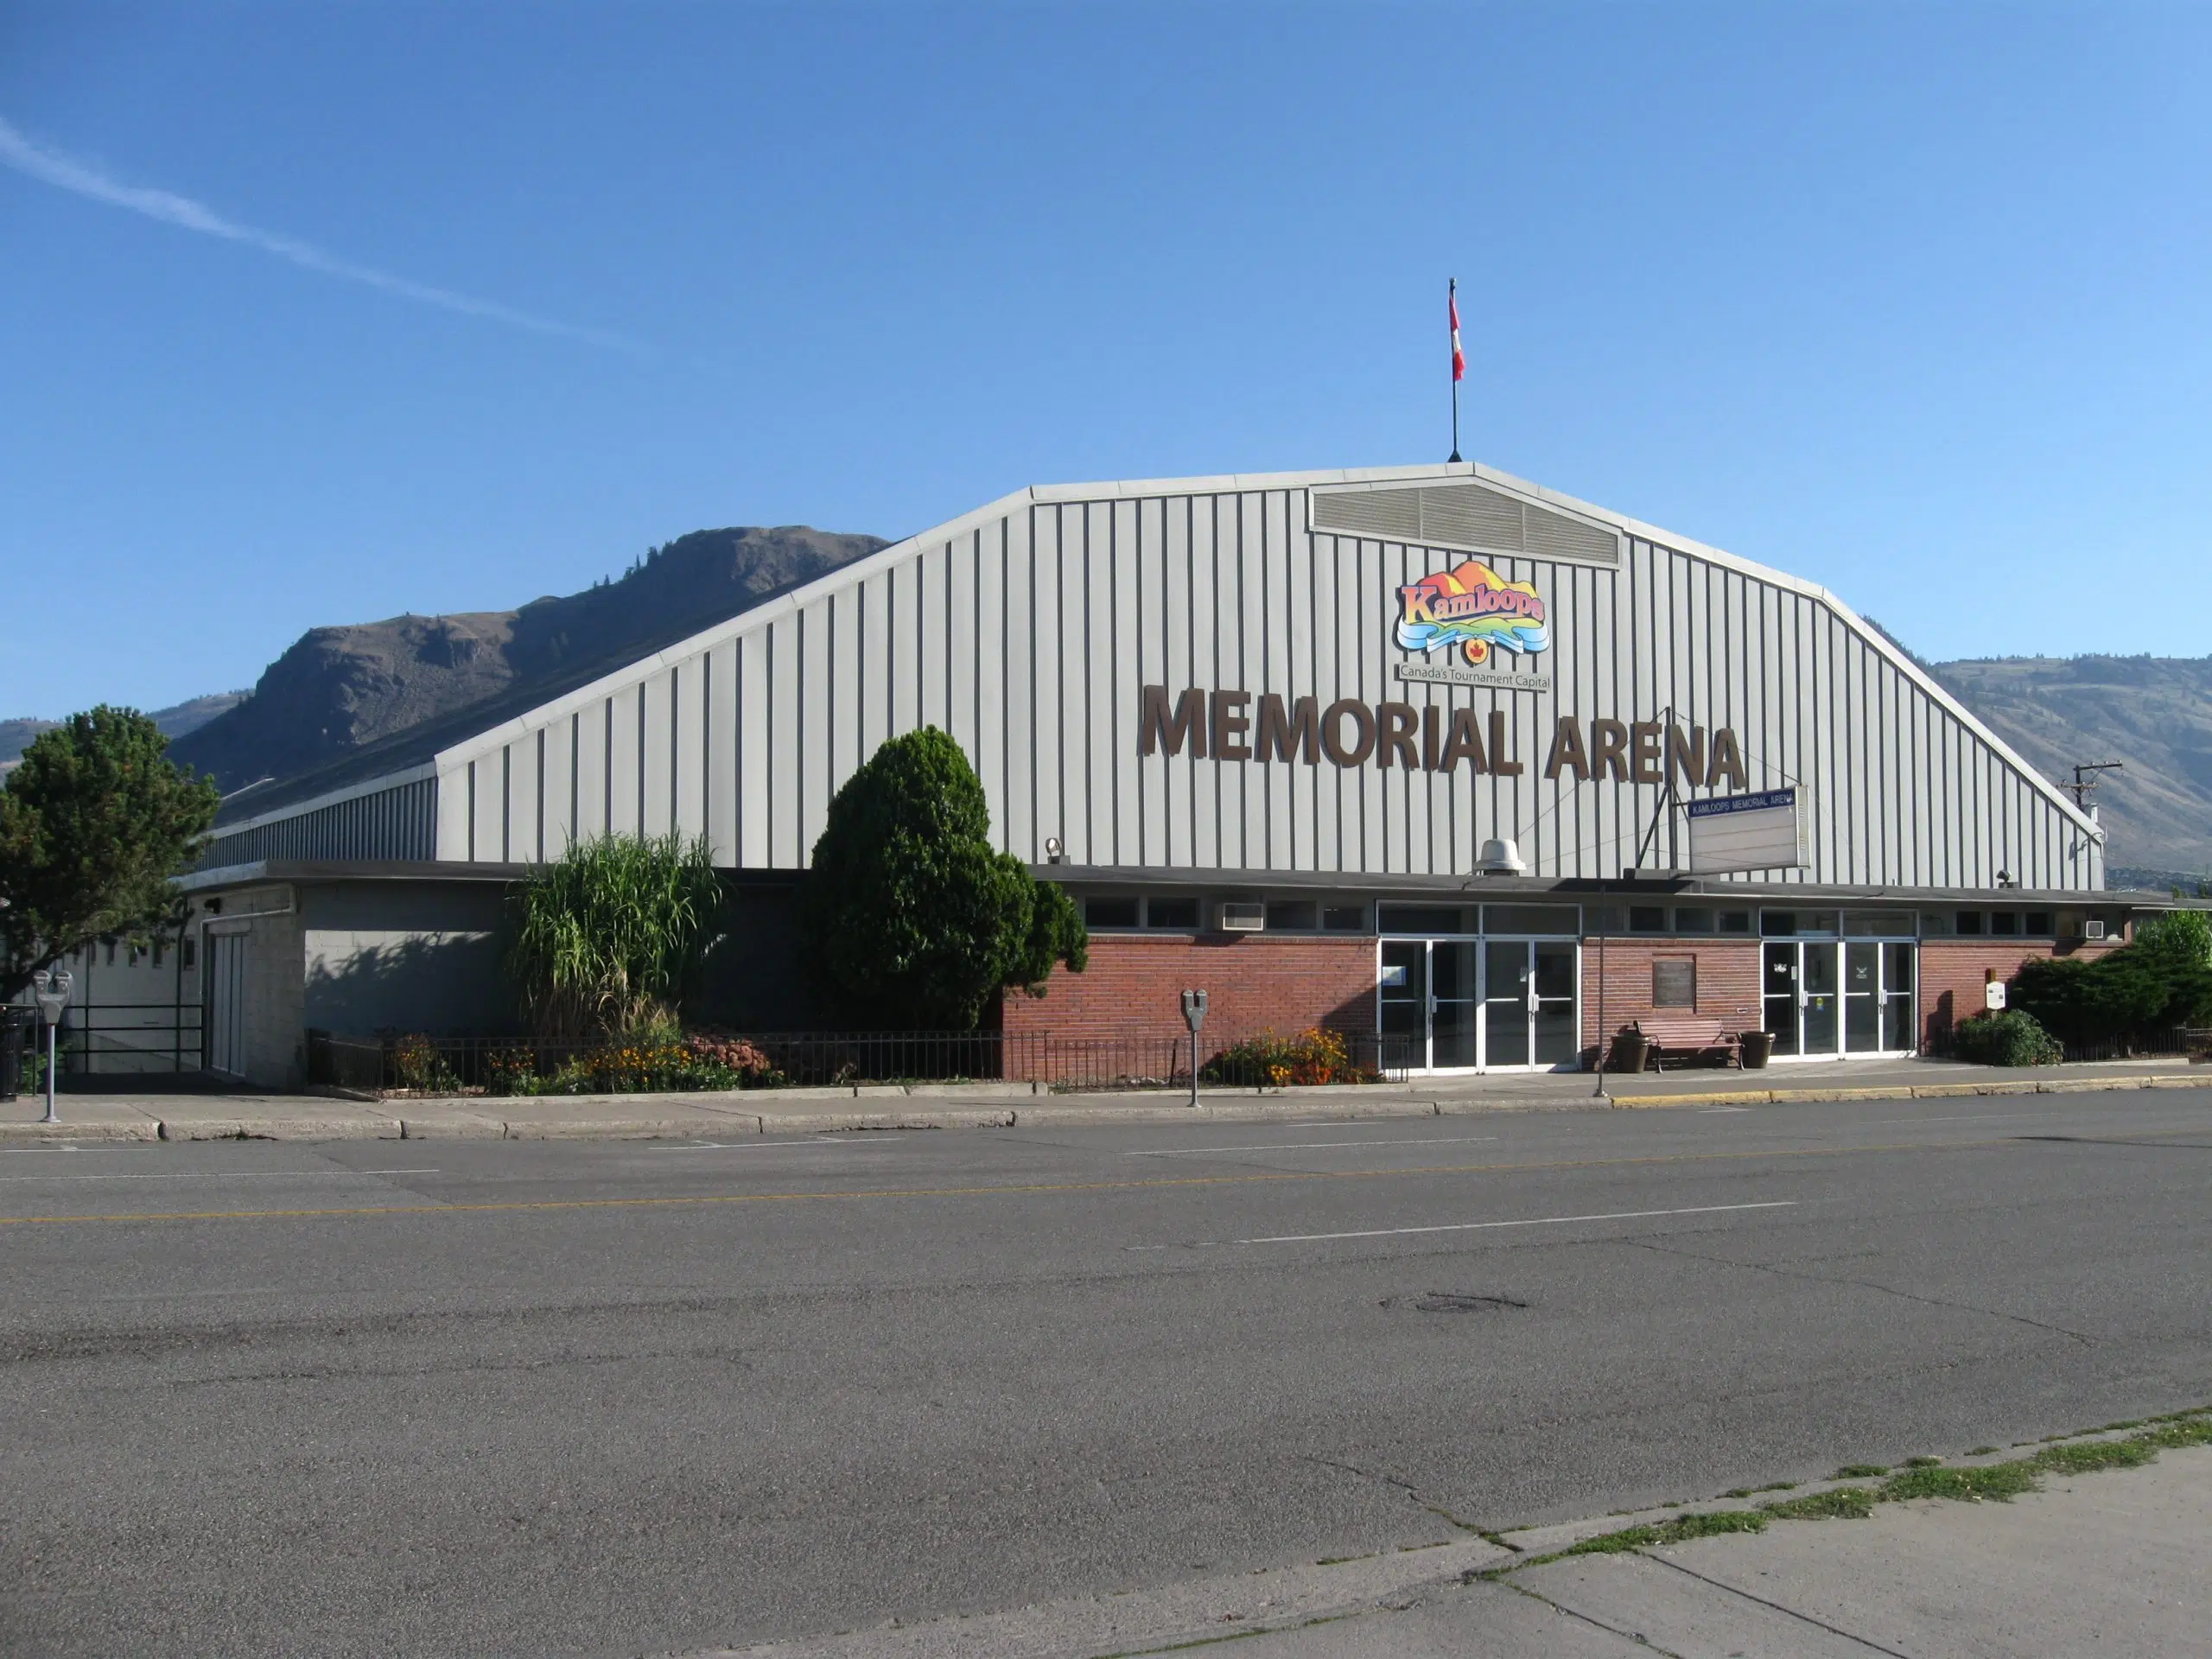 With Memorial Arena out of commission, Kamloops ice time will be limited this winter